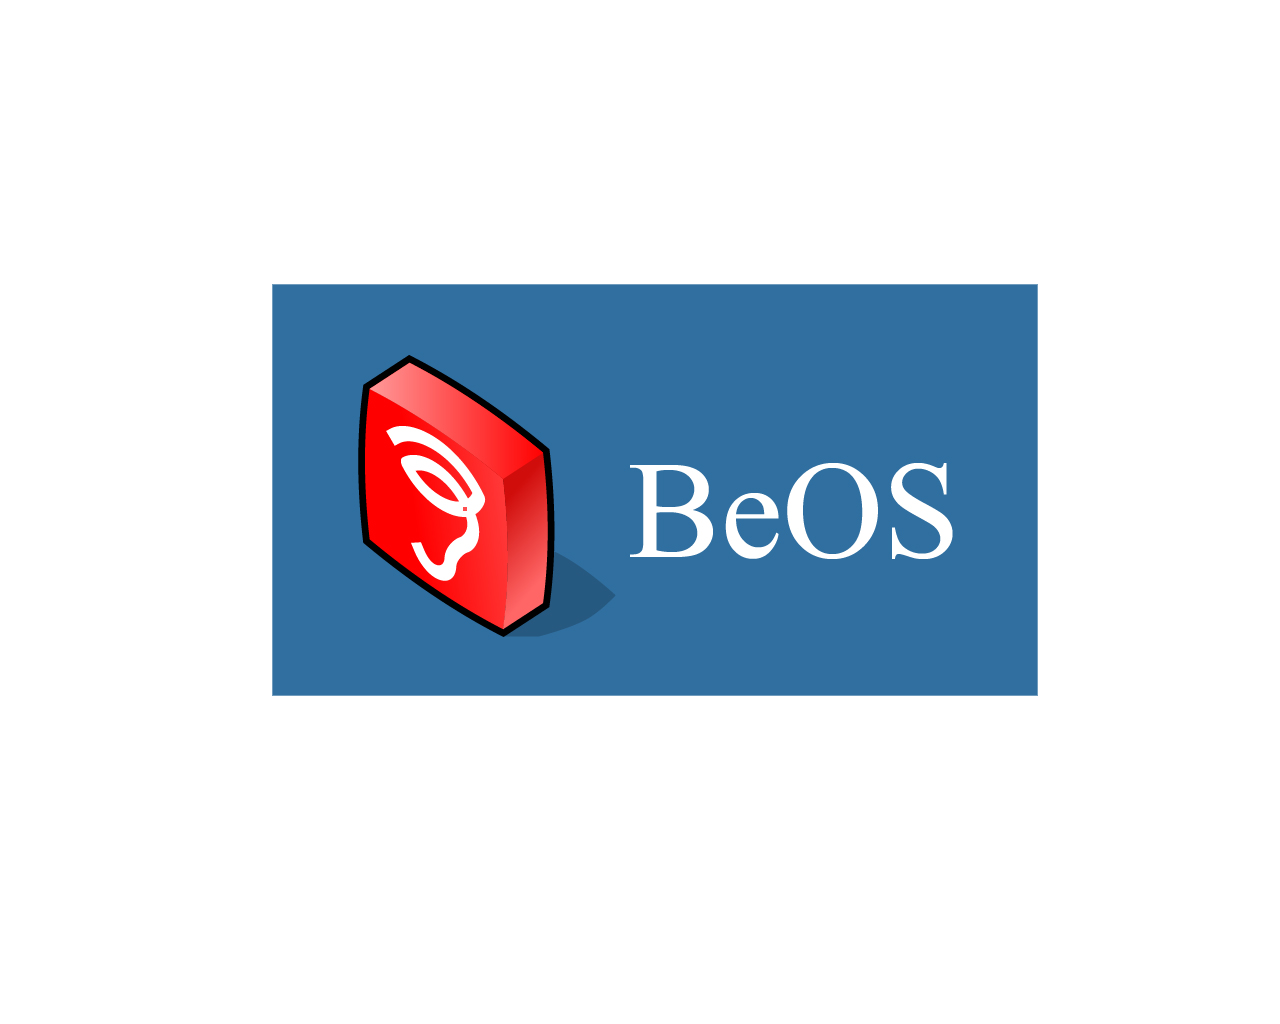 File:Beos-wallpapers 1334 1280x1024.png